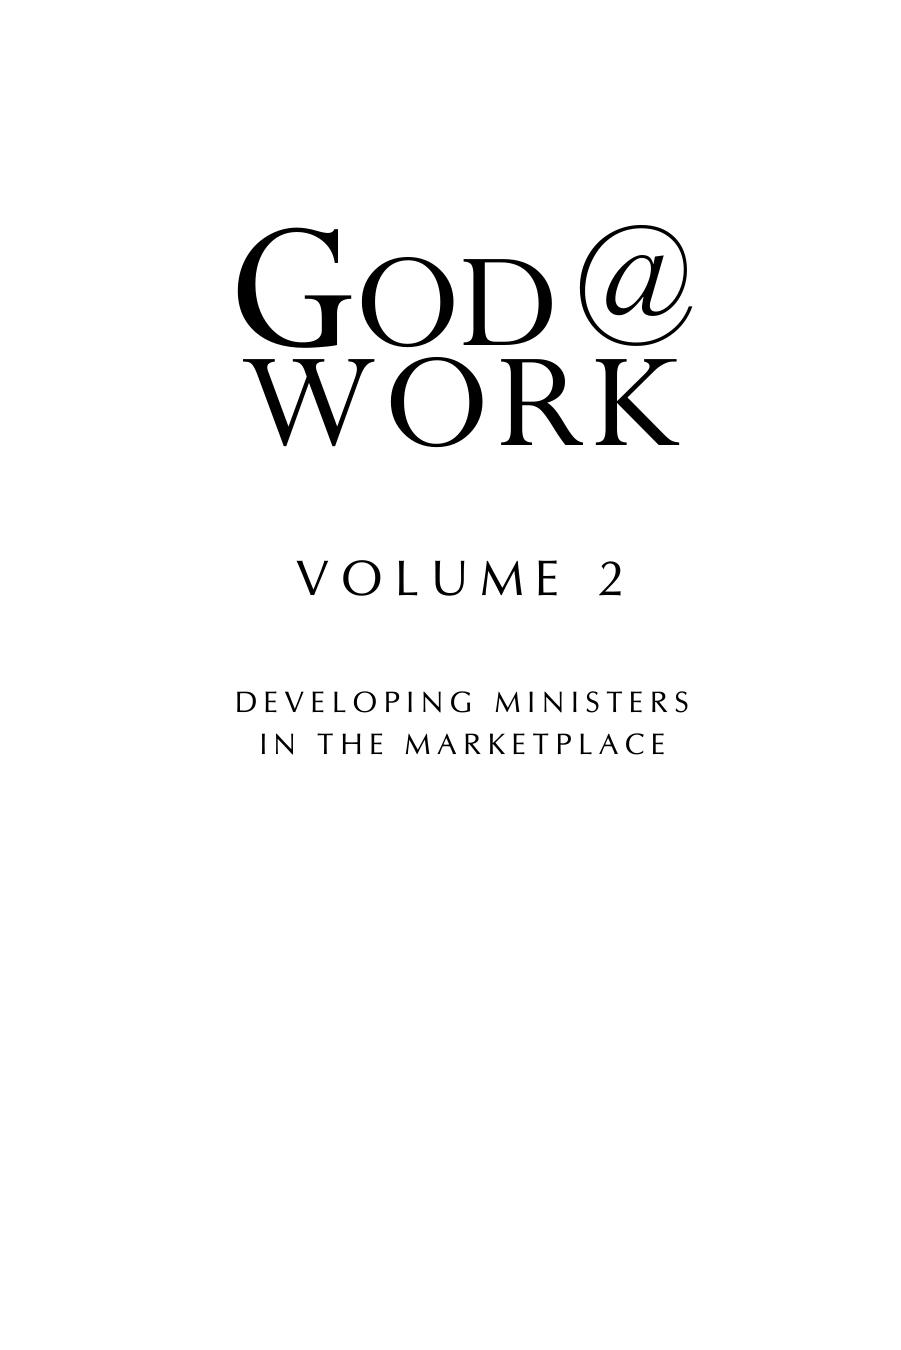 God @ Work: Developing Ministers in the Marketplace, Vol. 2 by Rich Marshall